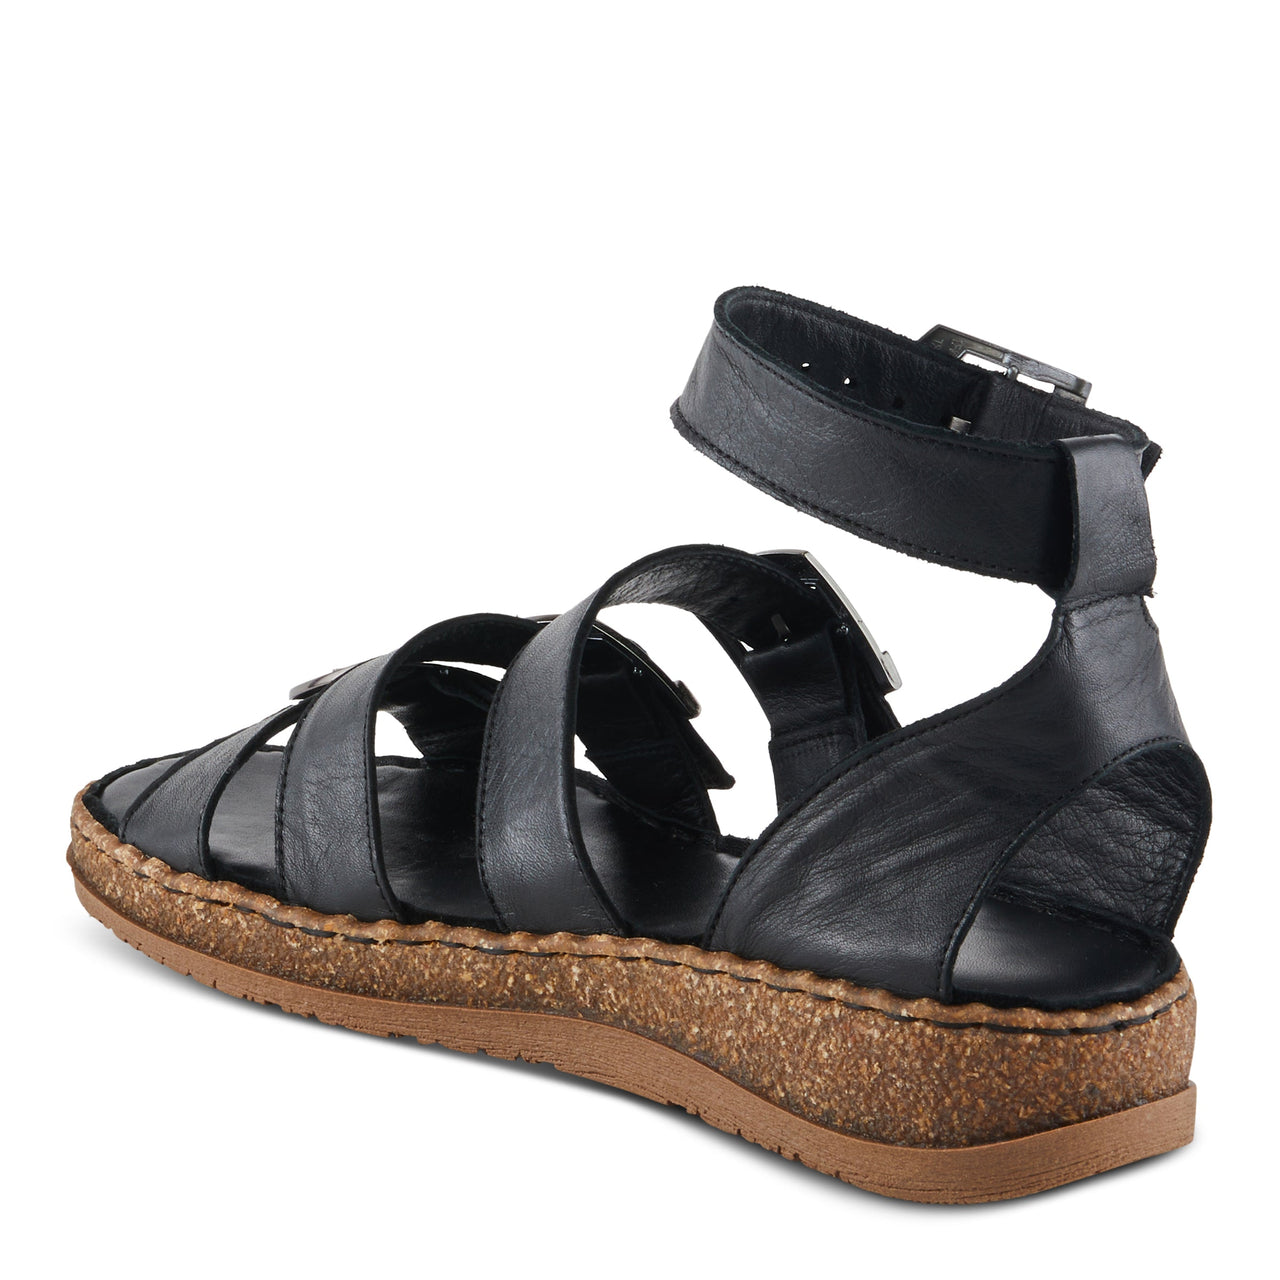 Stylish and comfortable Spring Step Alexcia sandals in black color with adjustable straps and cushioned insole for all-day wear